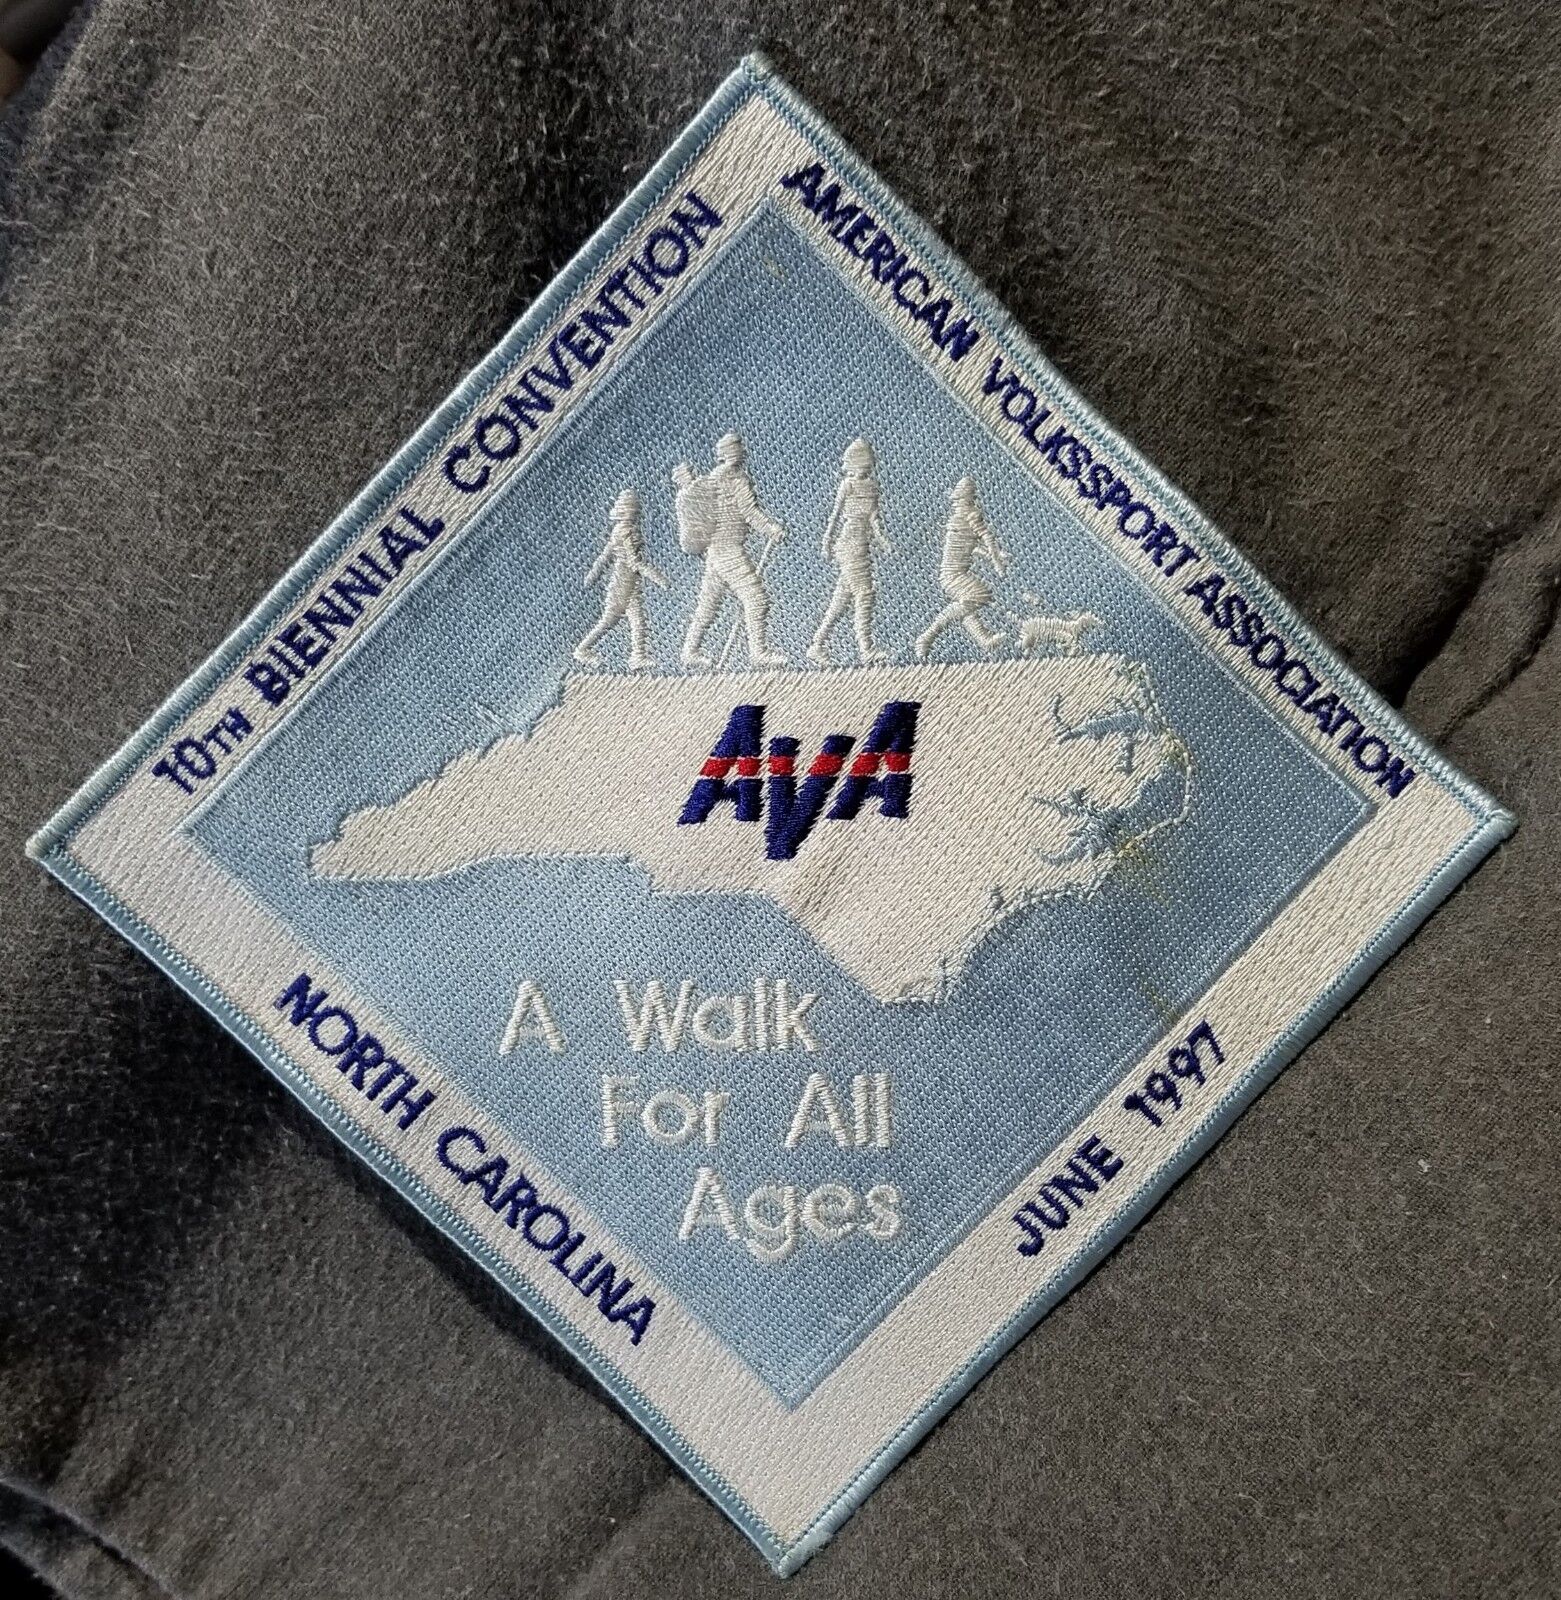 Lmh Patch 1997 Walk For Ages Volksmarch Walking Club Ivv Ava Volkssport Il 8.5"